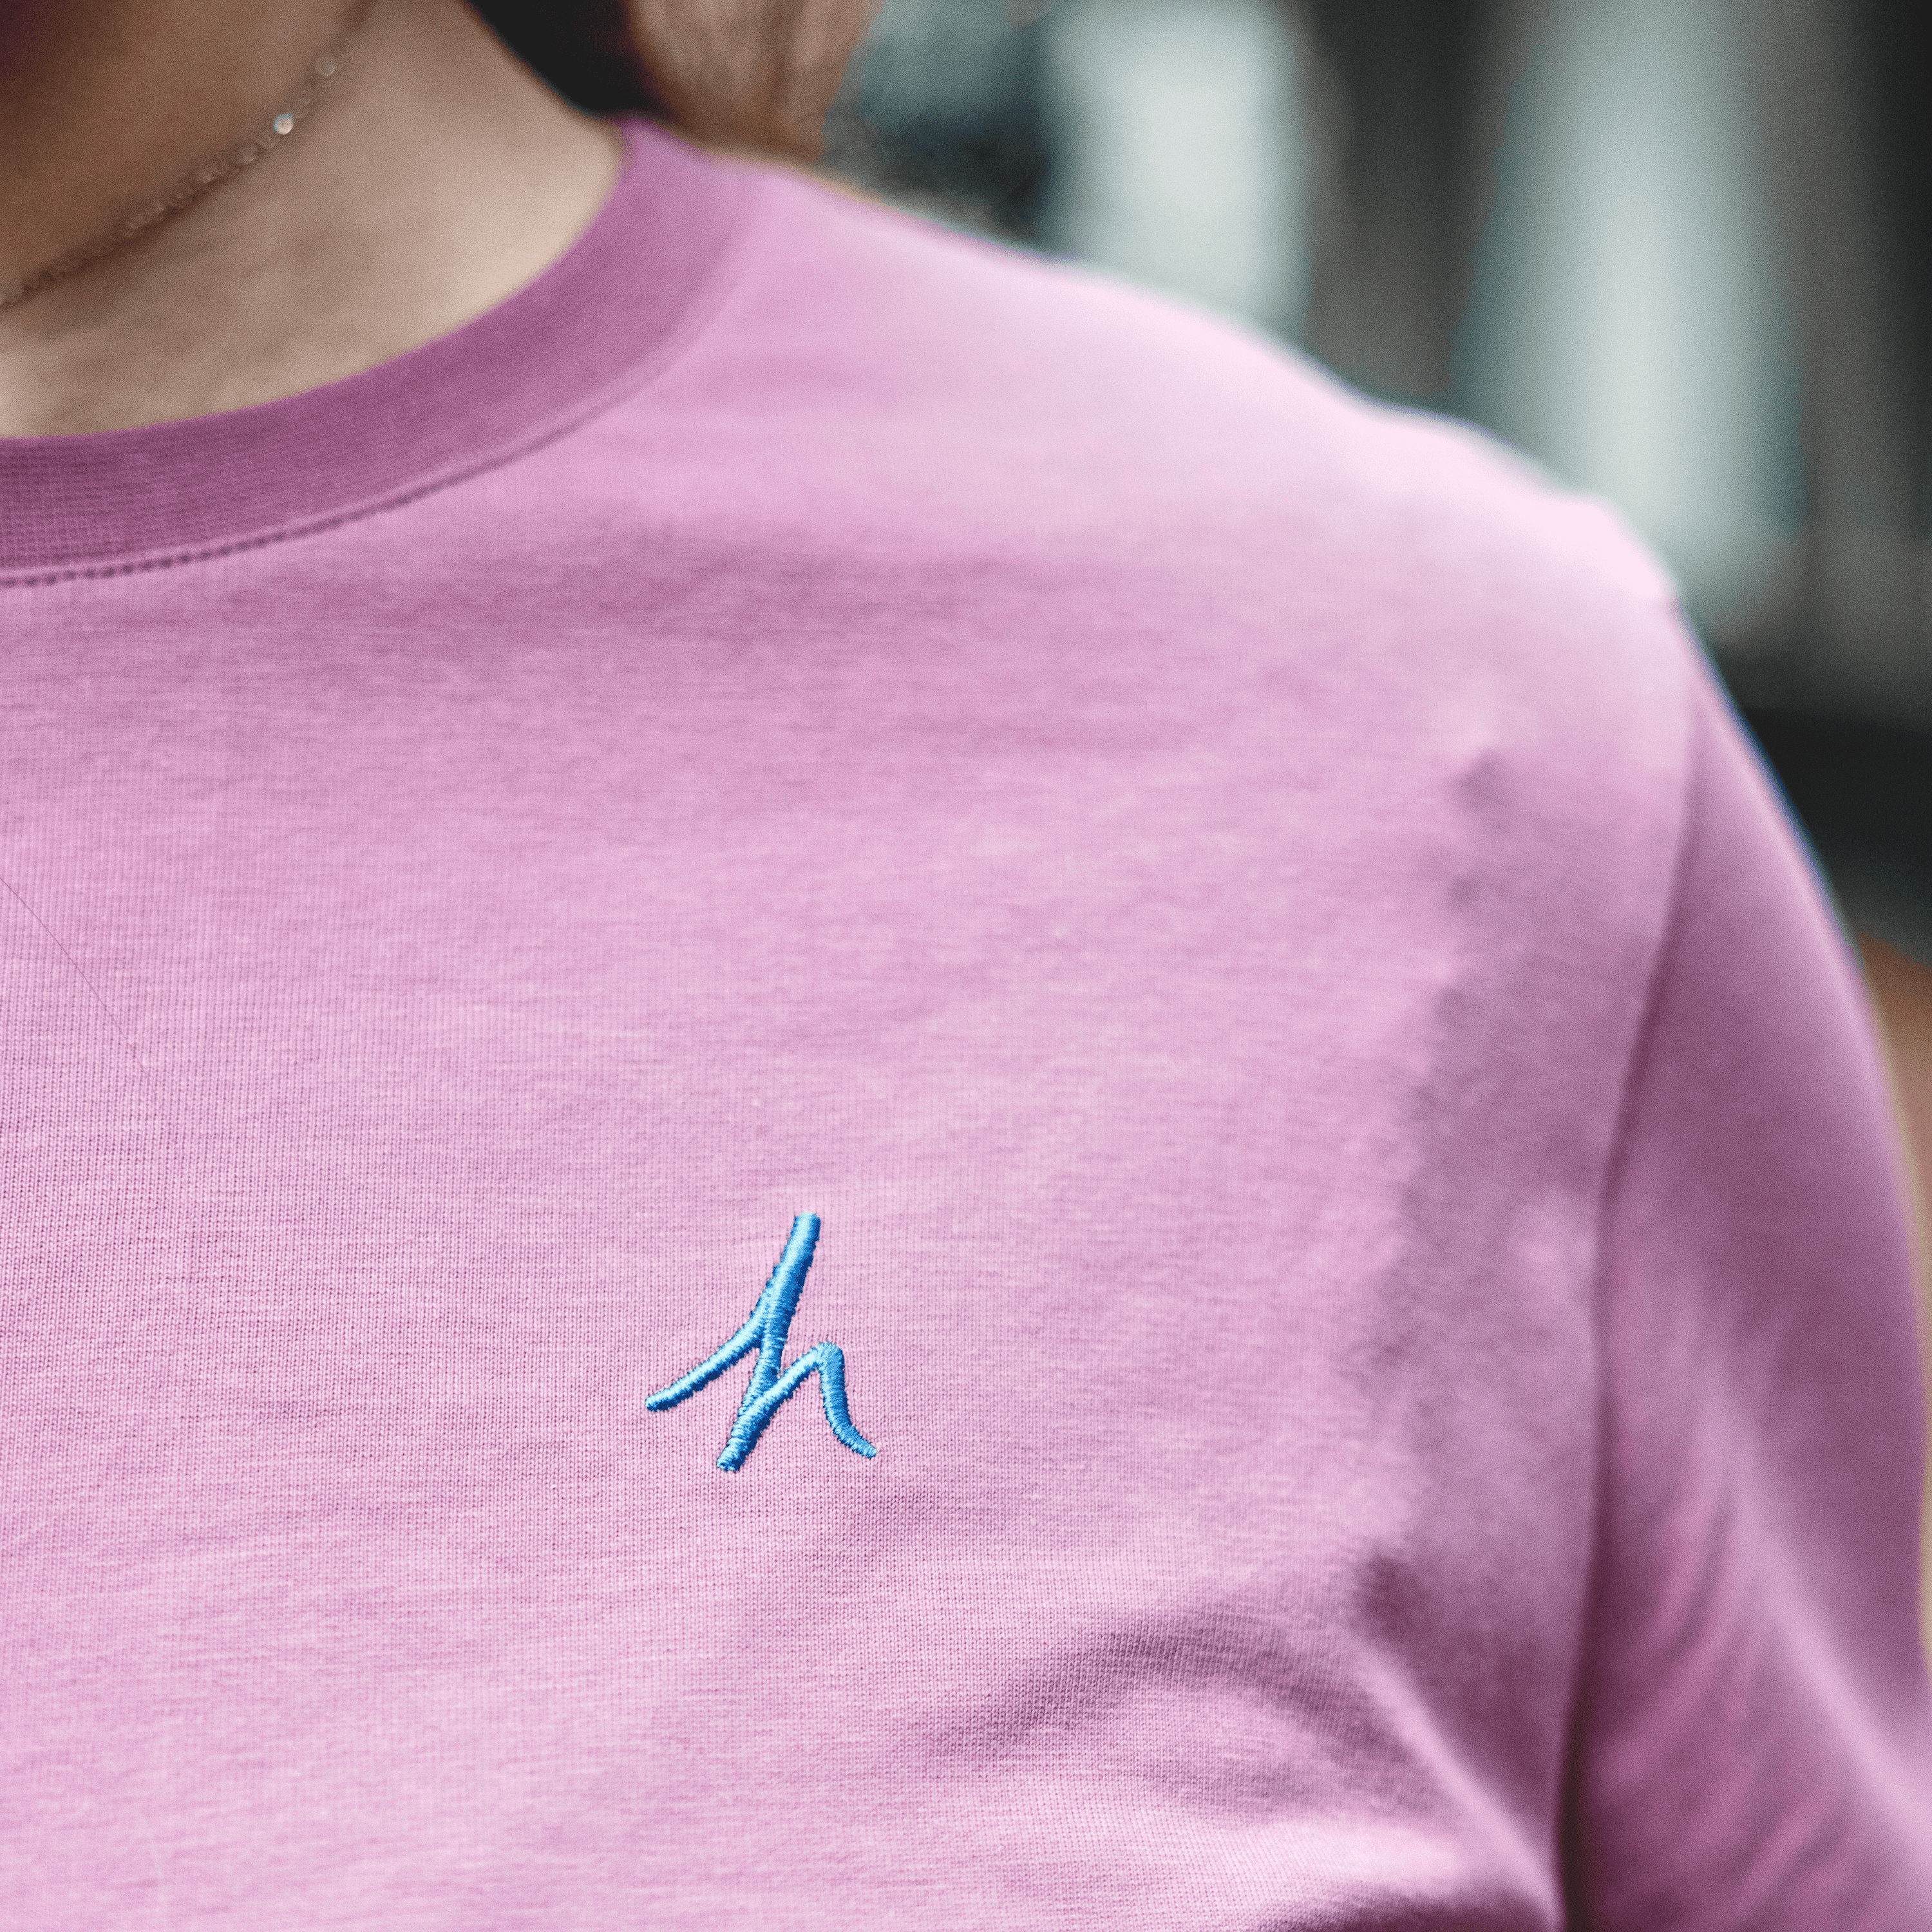 h clothing - close up of female model wearing a pastel pink tshirt with blue h logo